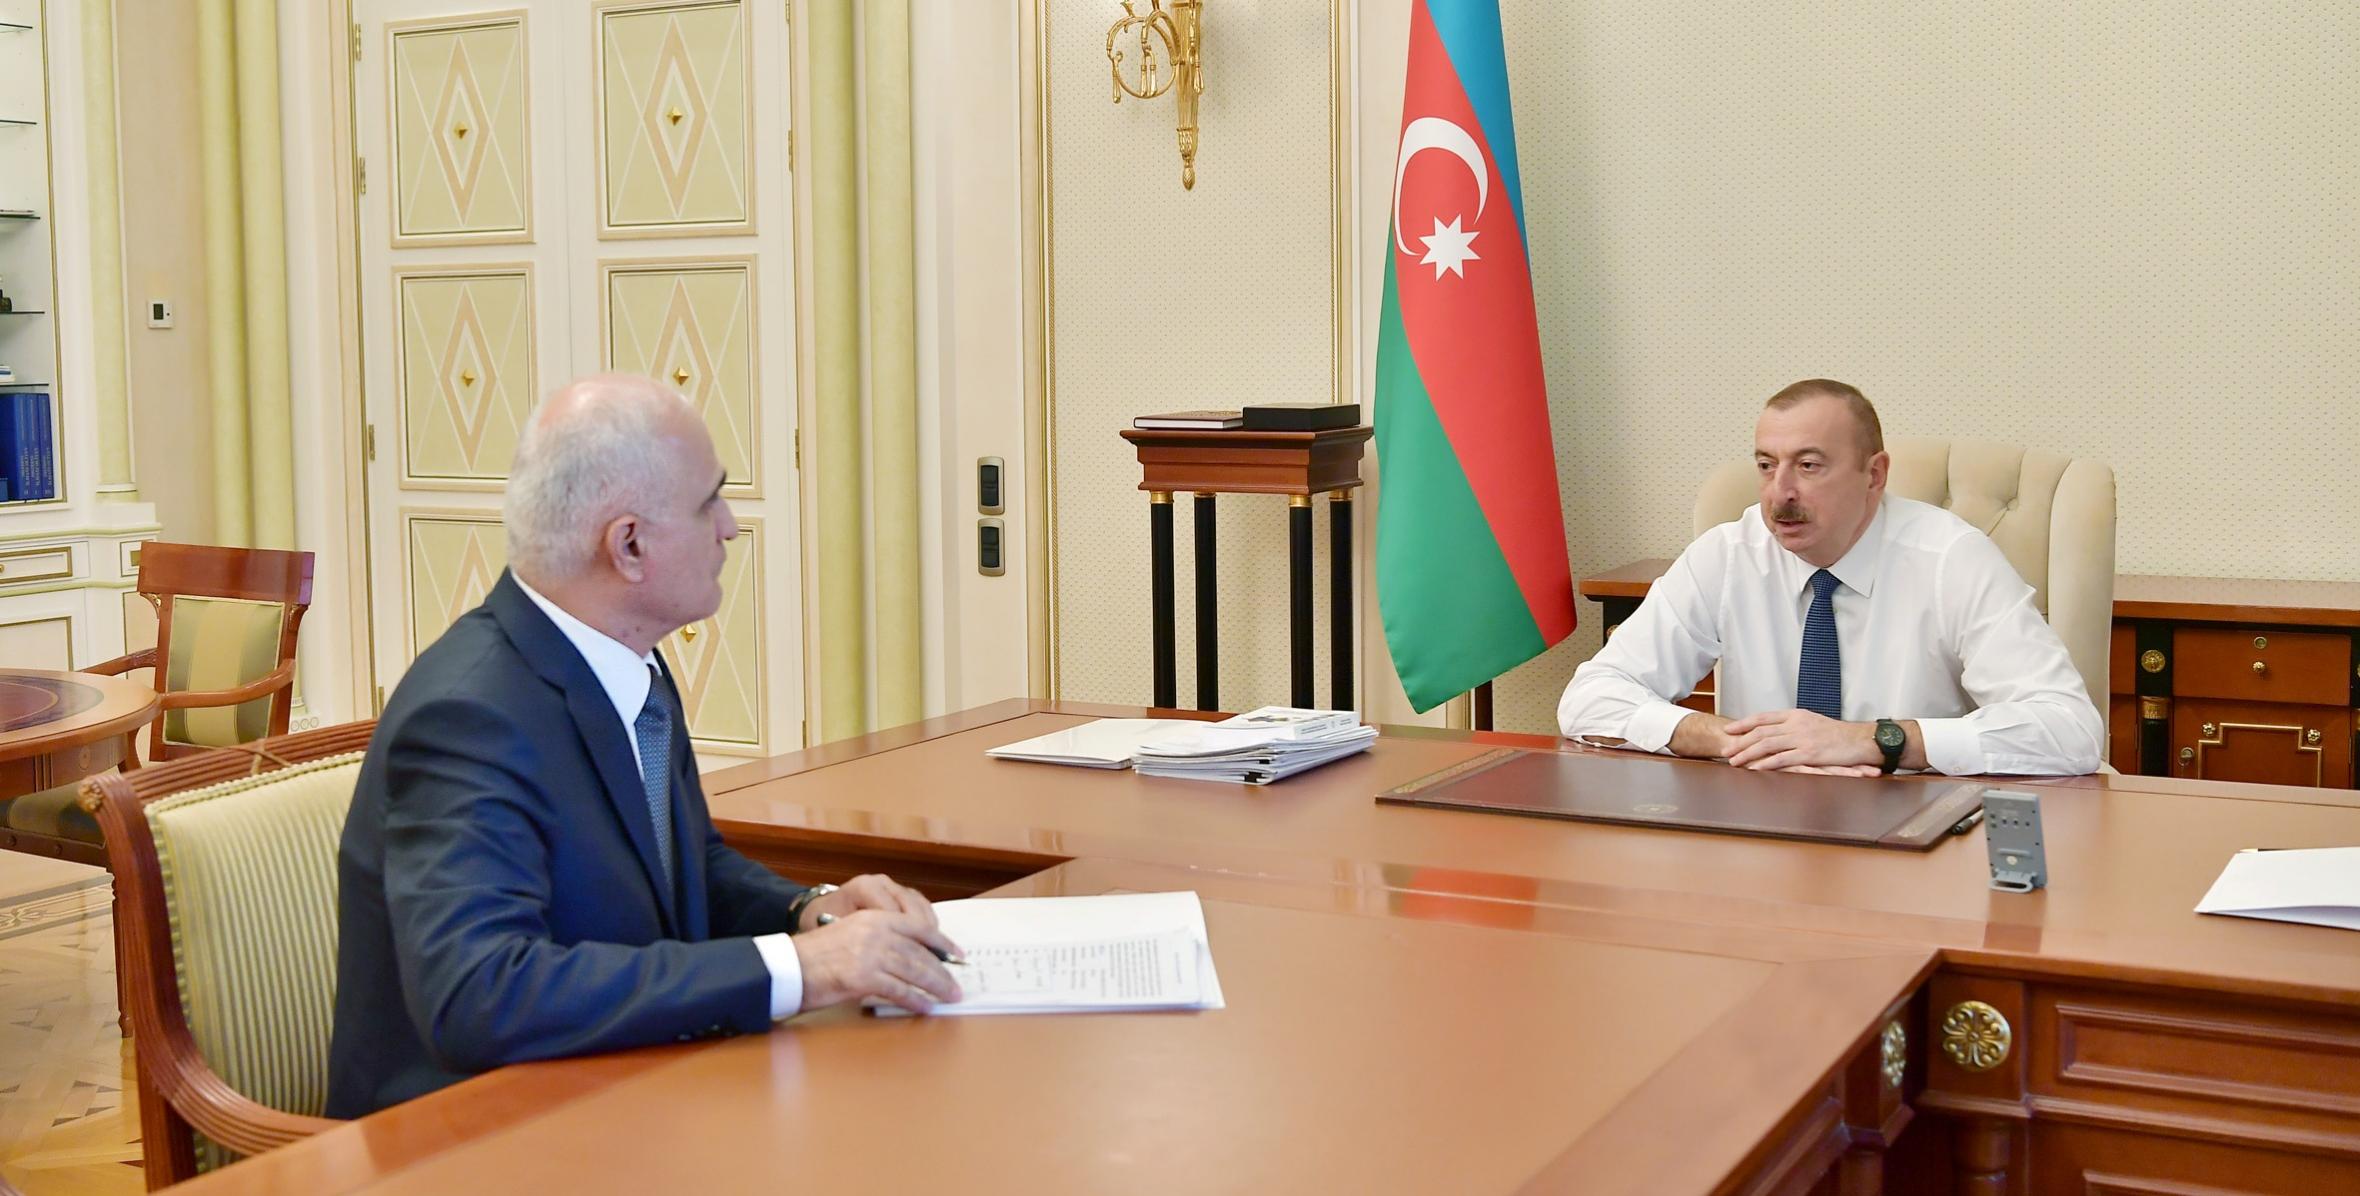 Ilham Aliyev received Shahin Mustafayev in connection with his appointment to new post